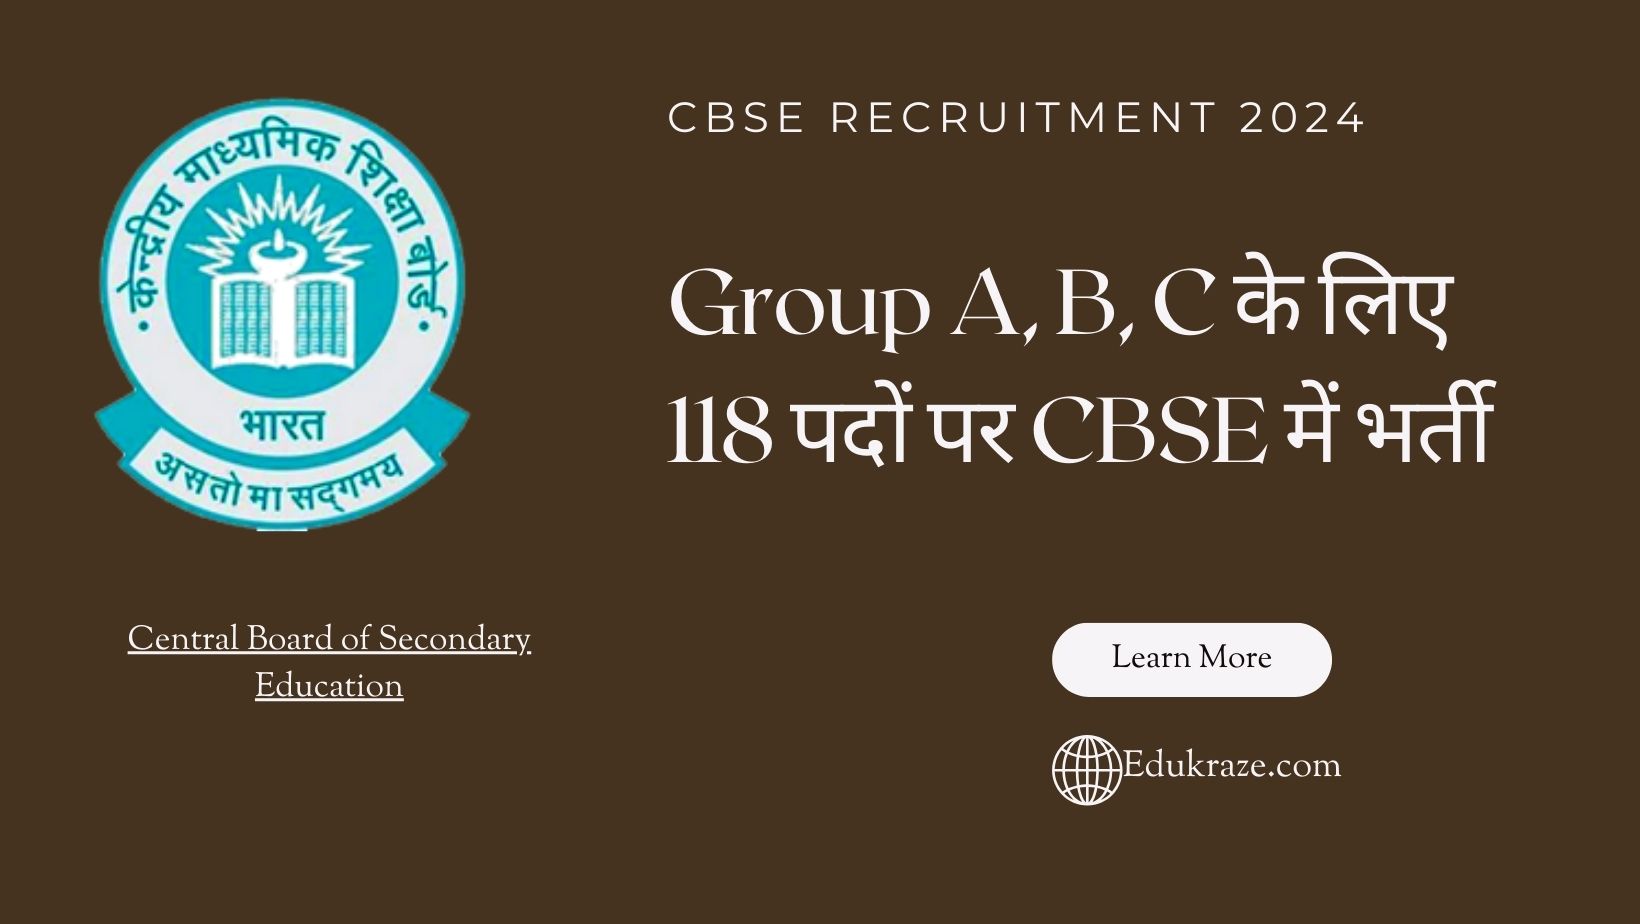 Group A, B, C Posts Recruitment 2024 Out at CBSE